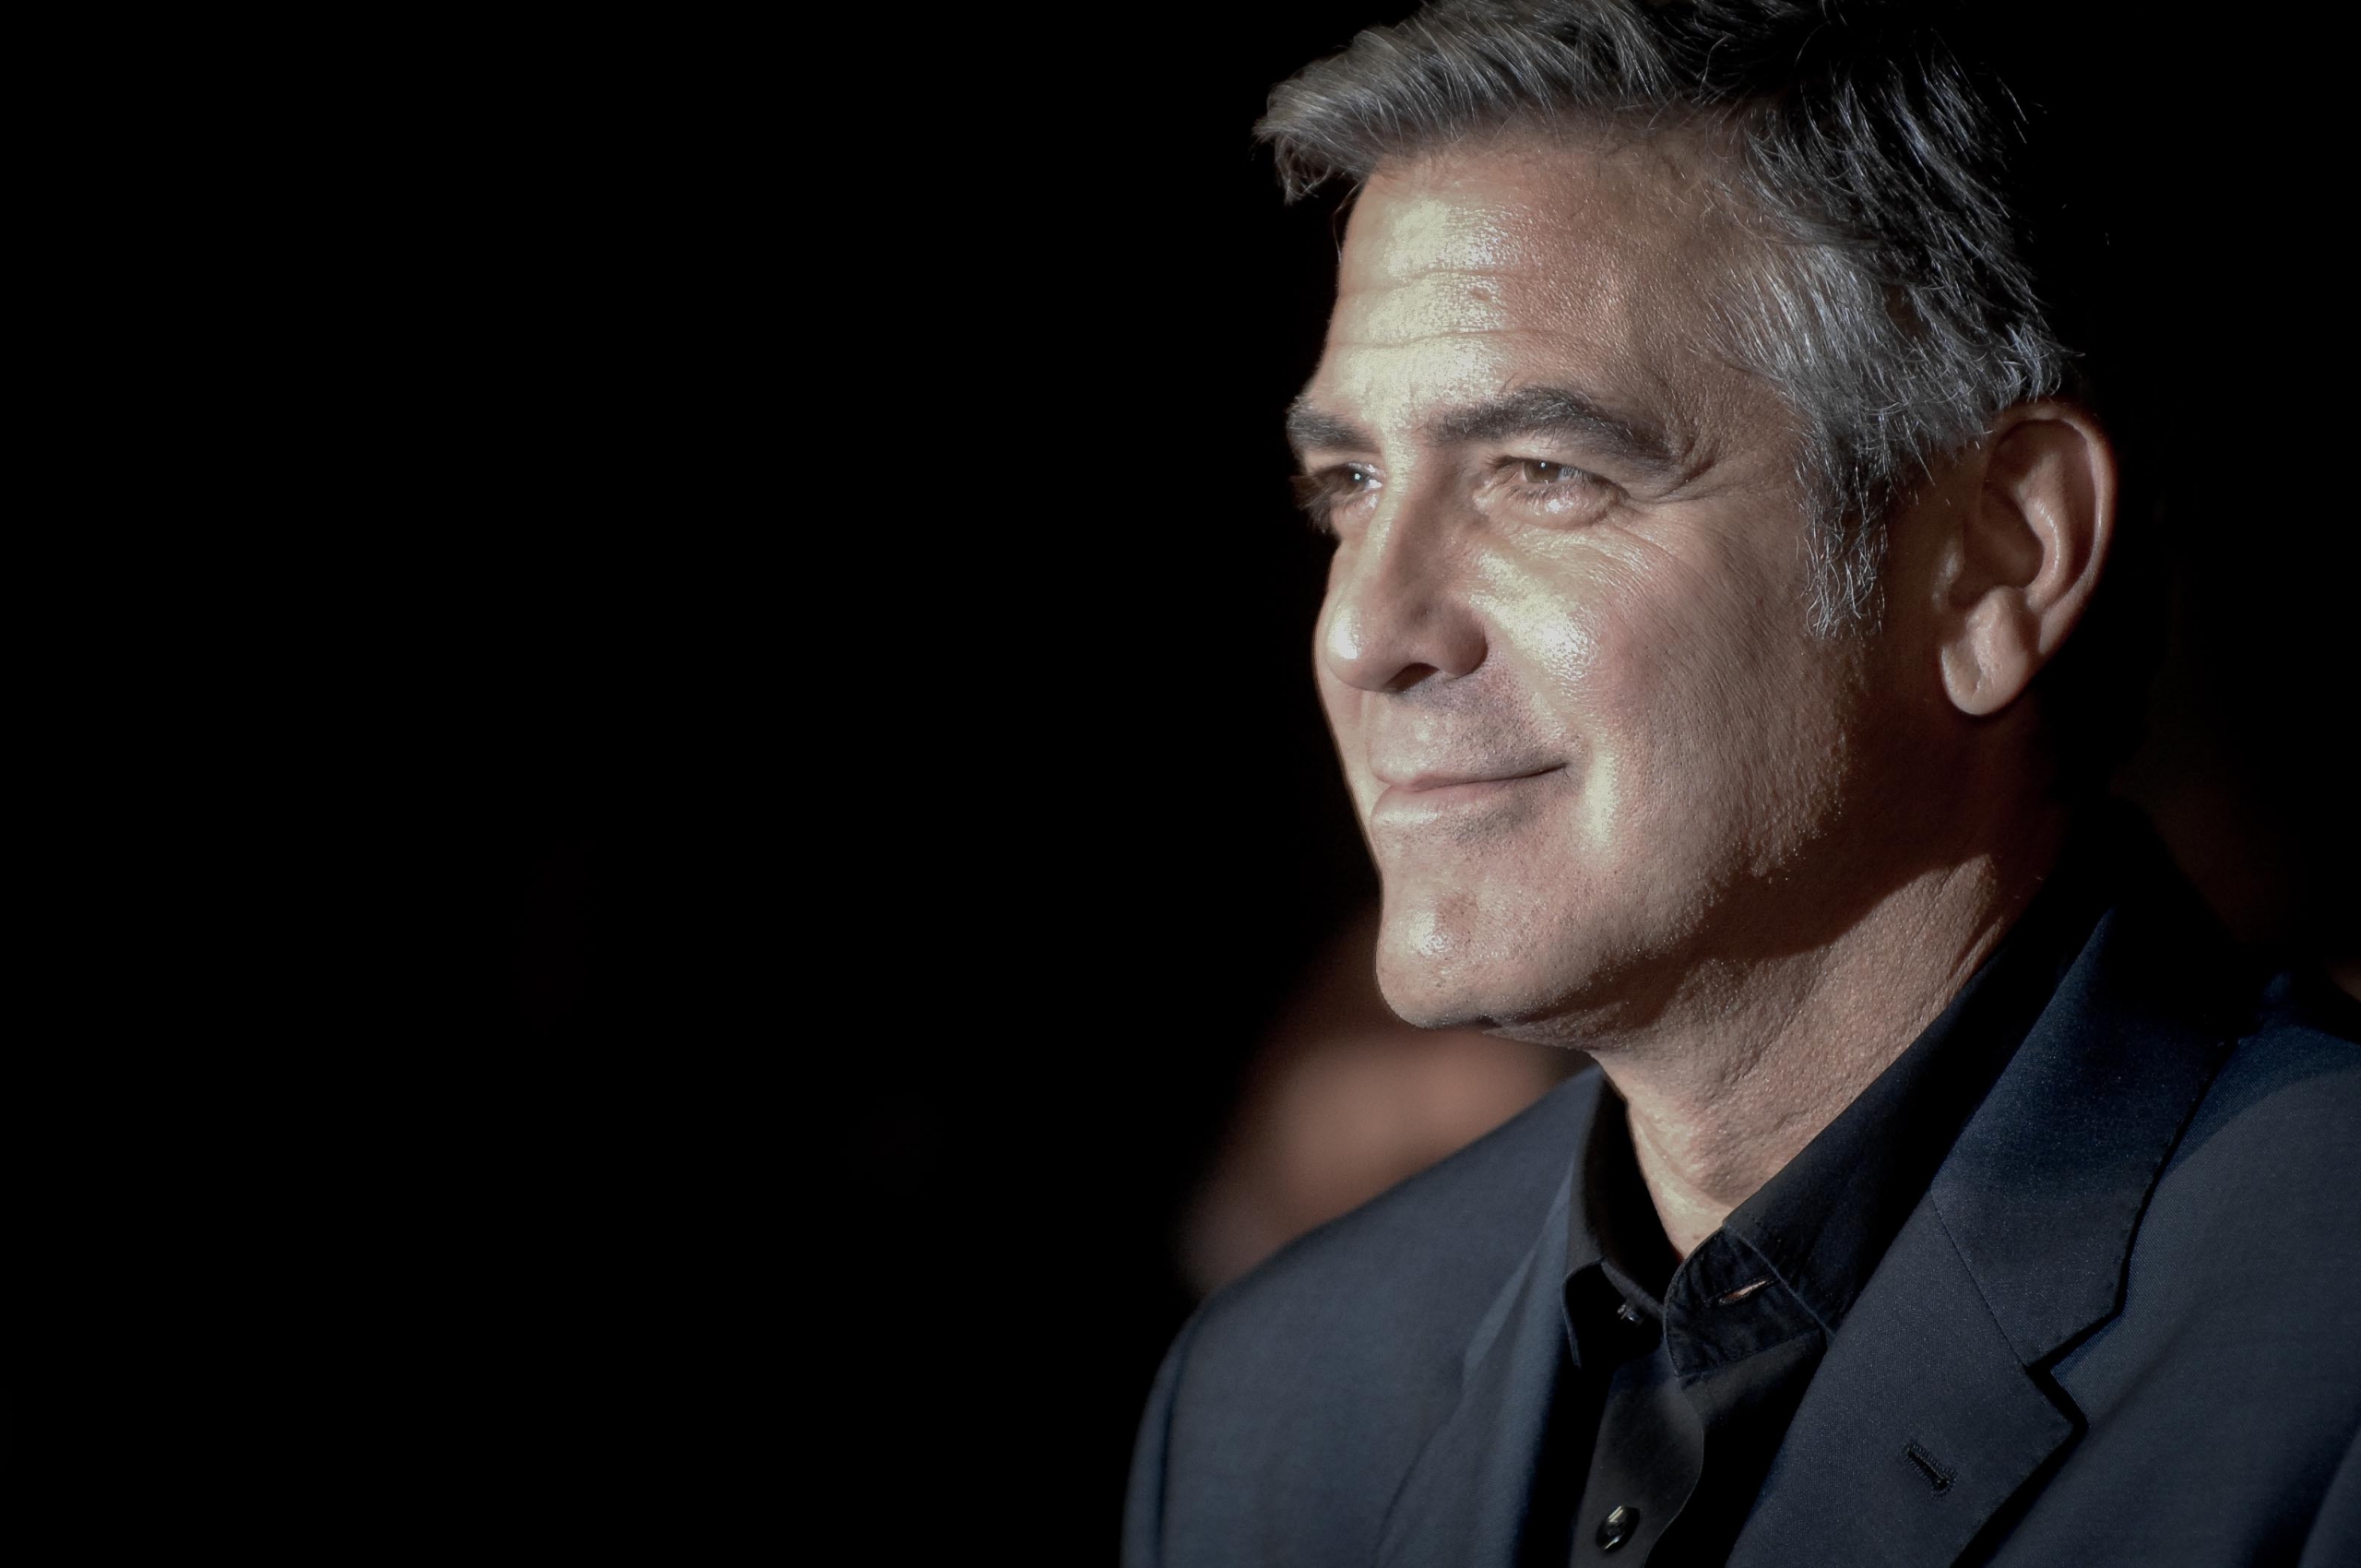 George Clooney Wallpaper Image Photos Pictures